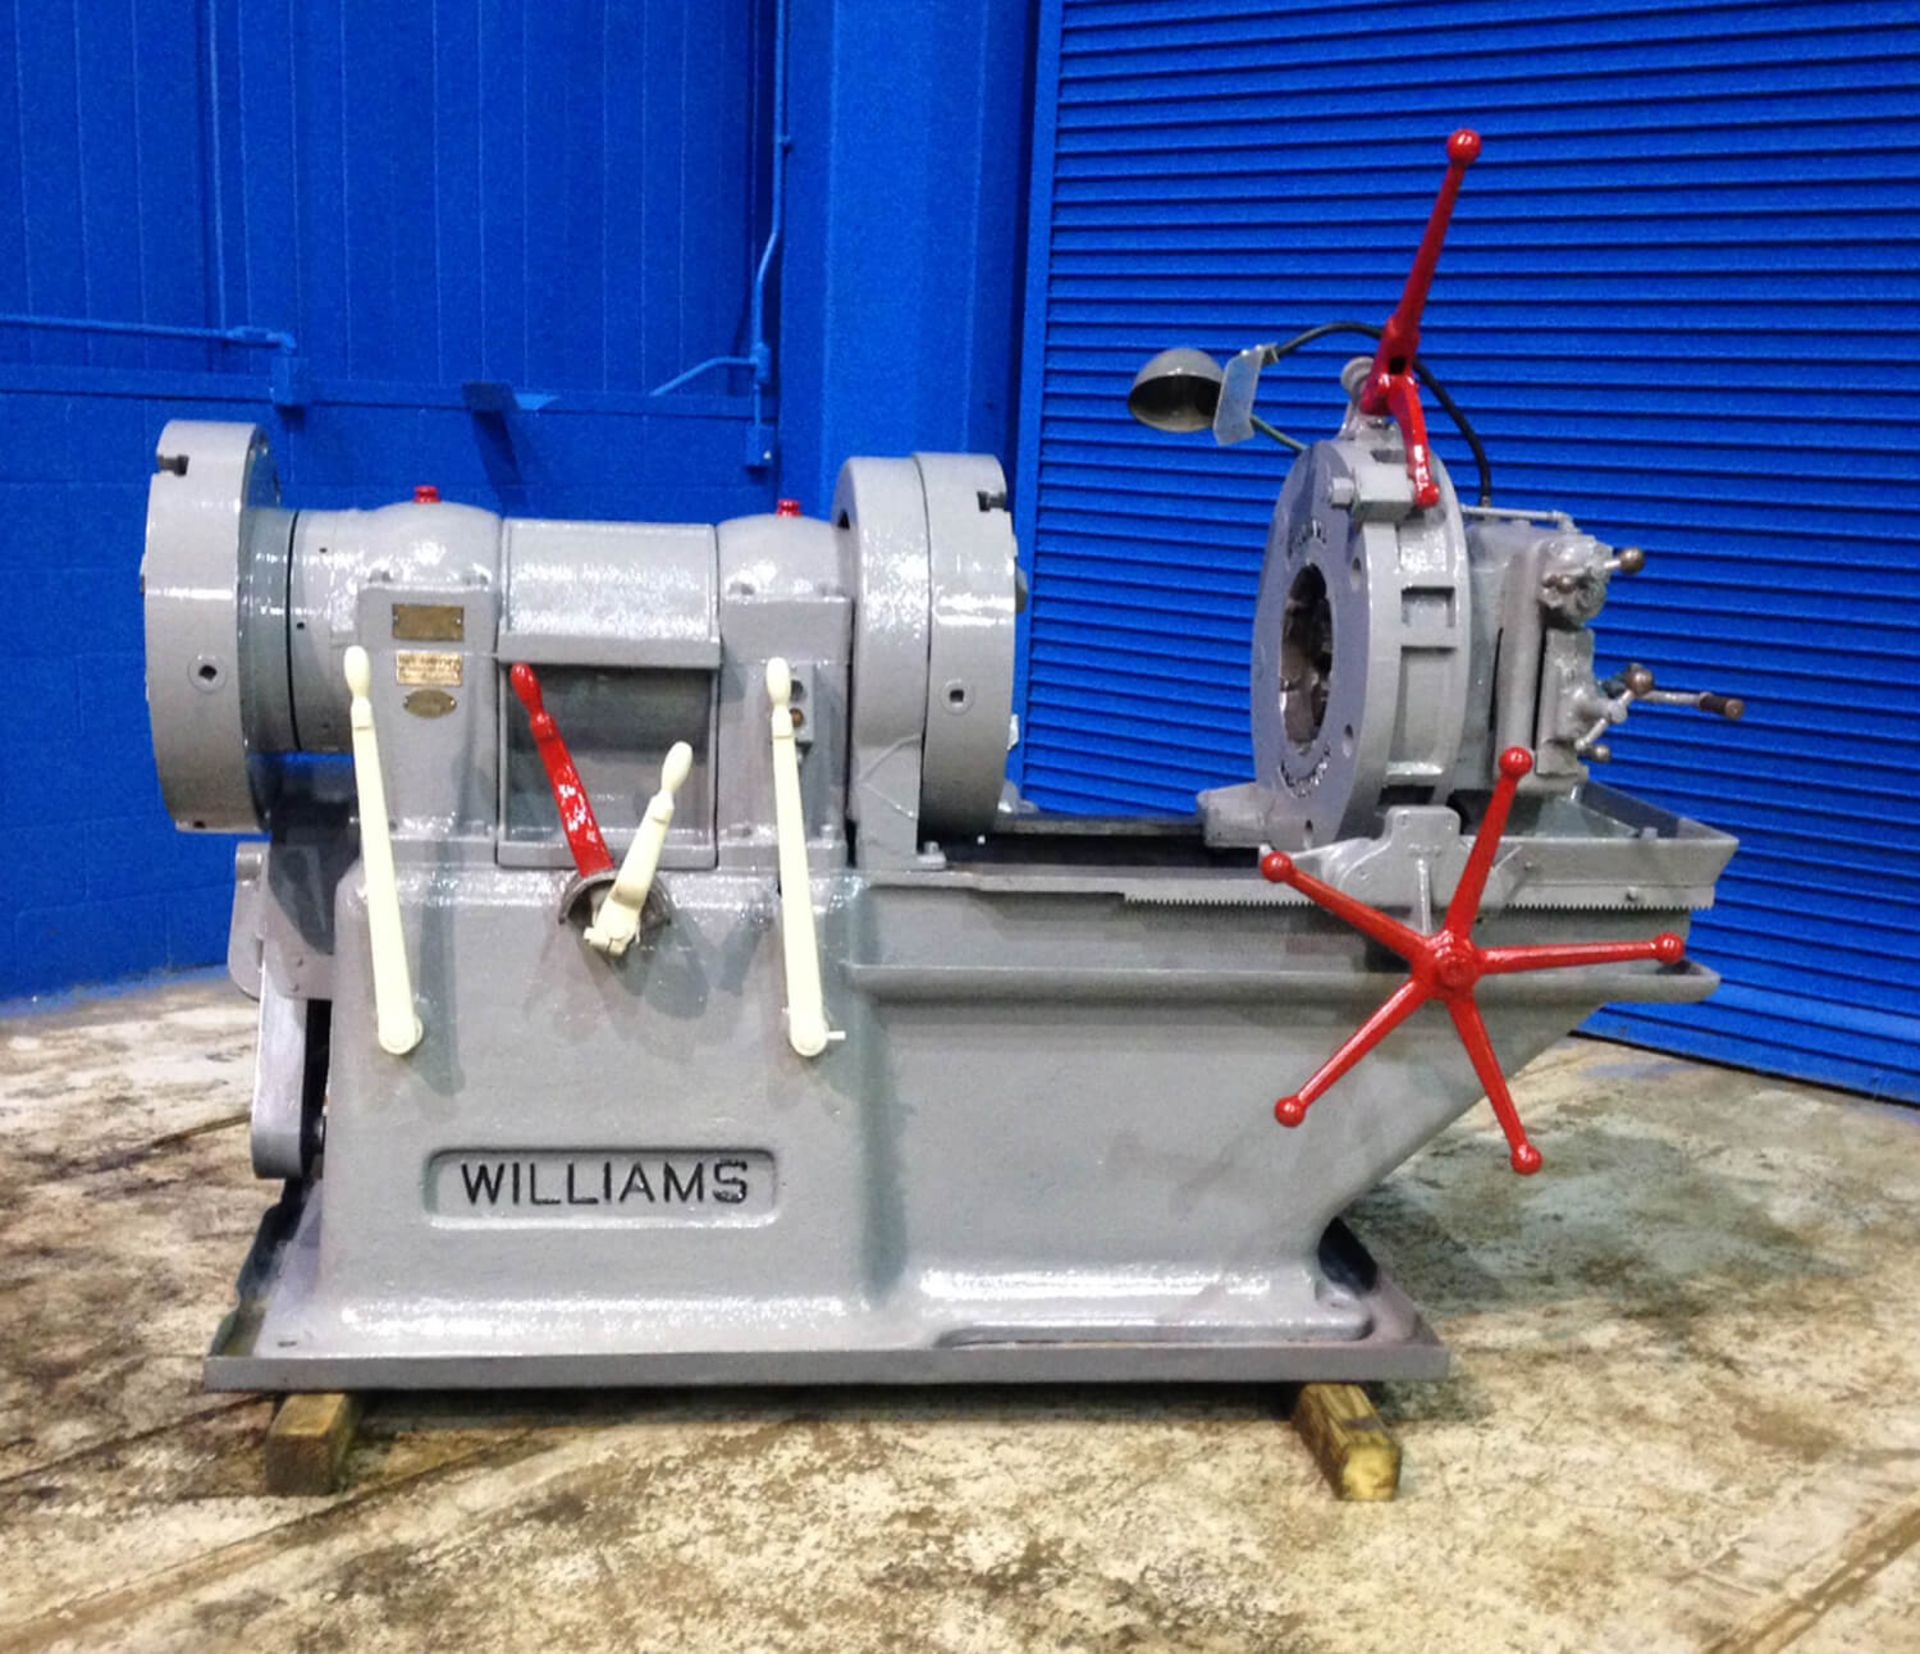 William Pipe & Bolt Threading Machine, 6", Mdl: HP, S/N: 5-5723-27 (6570P) (Located In